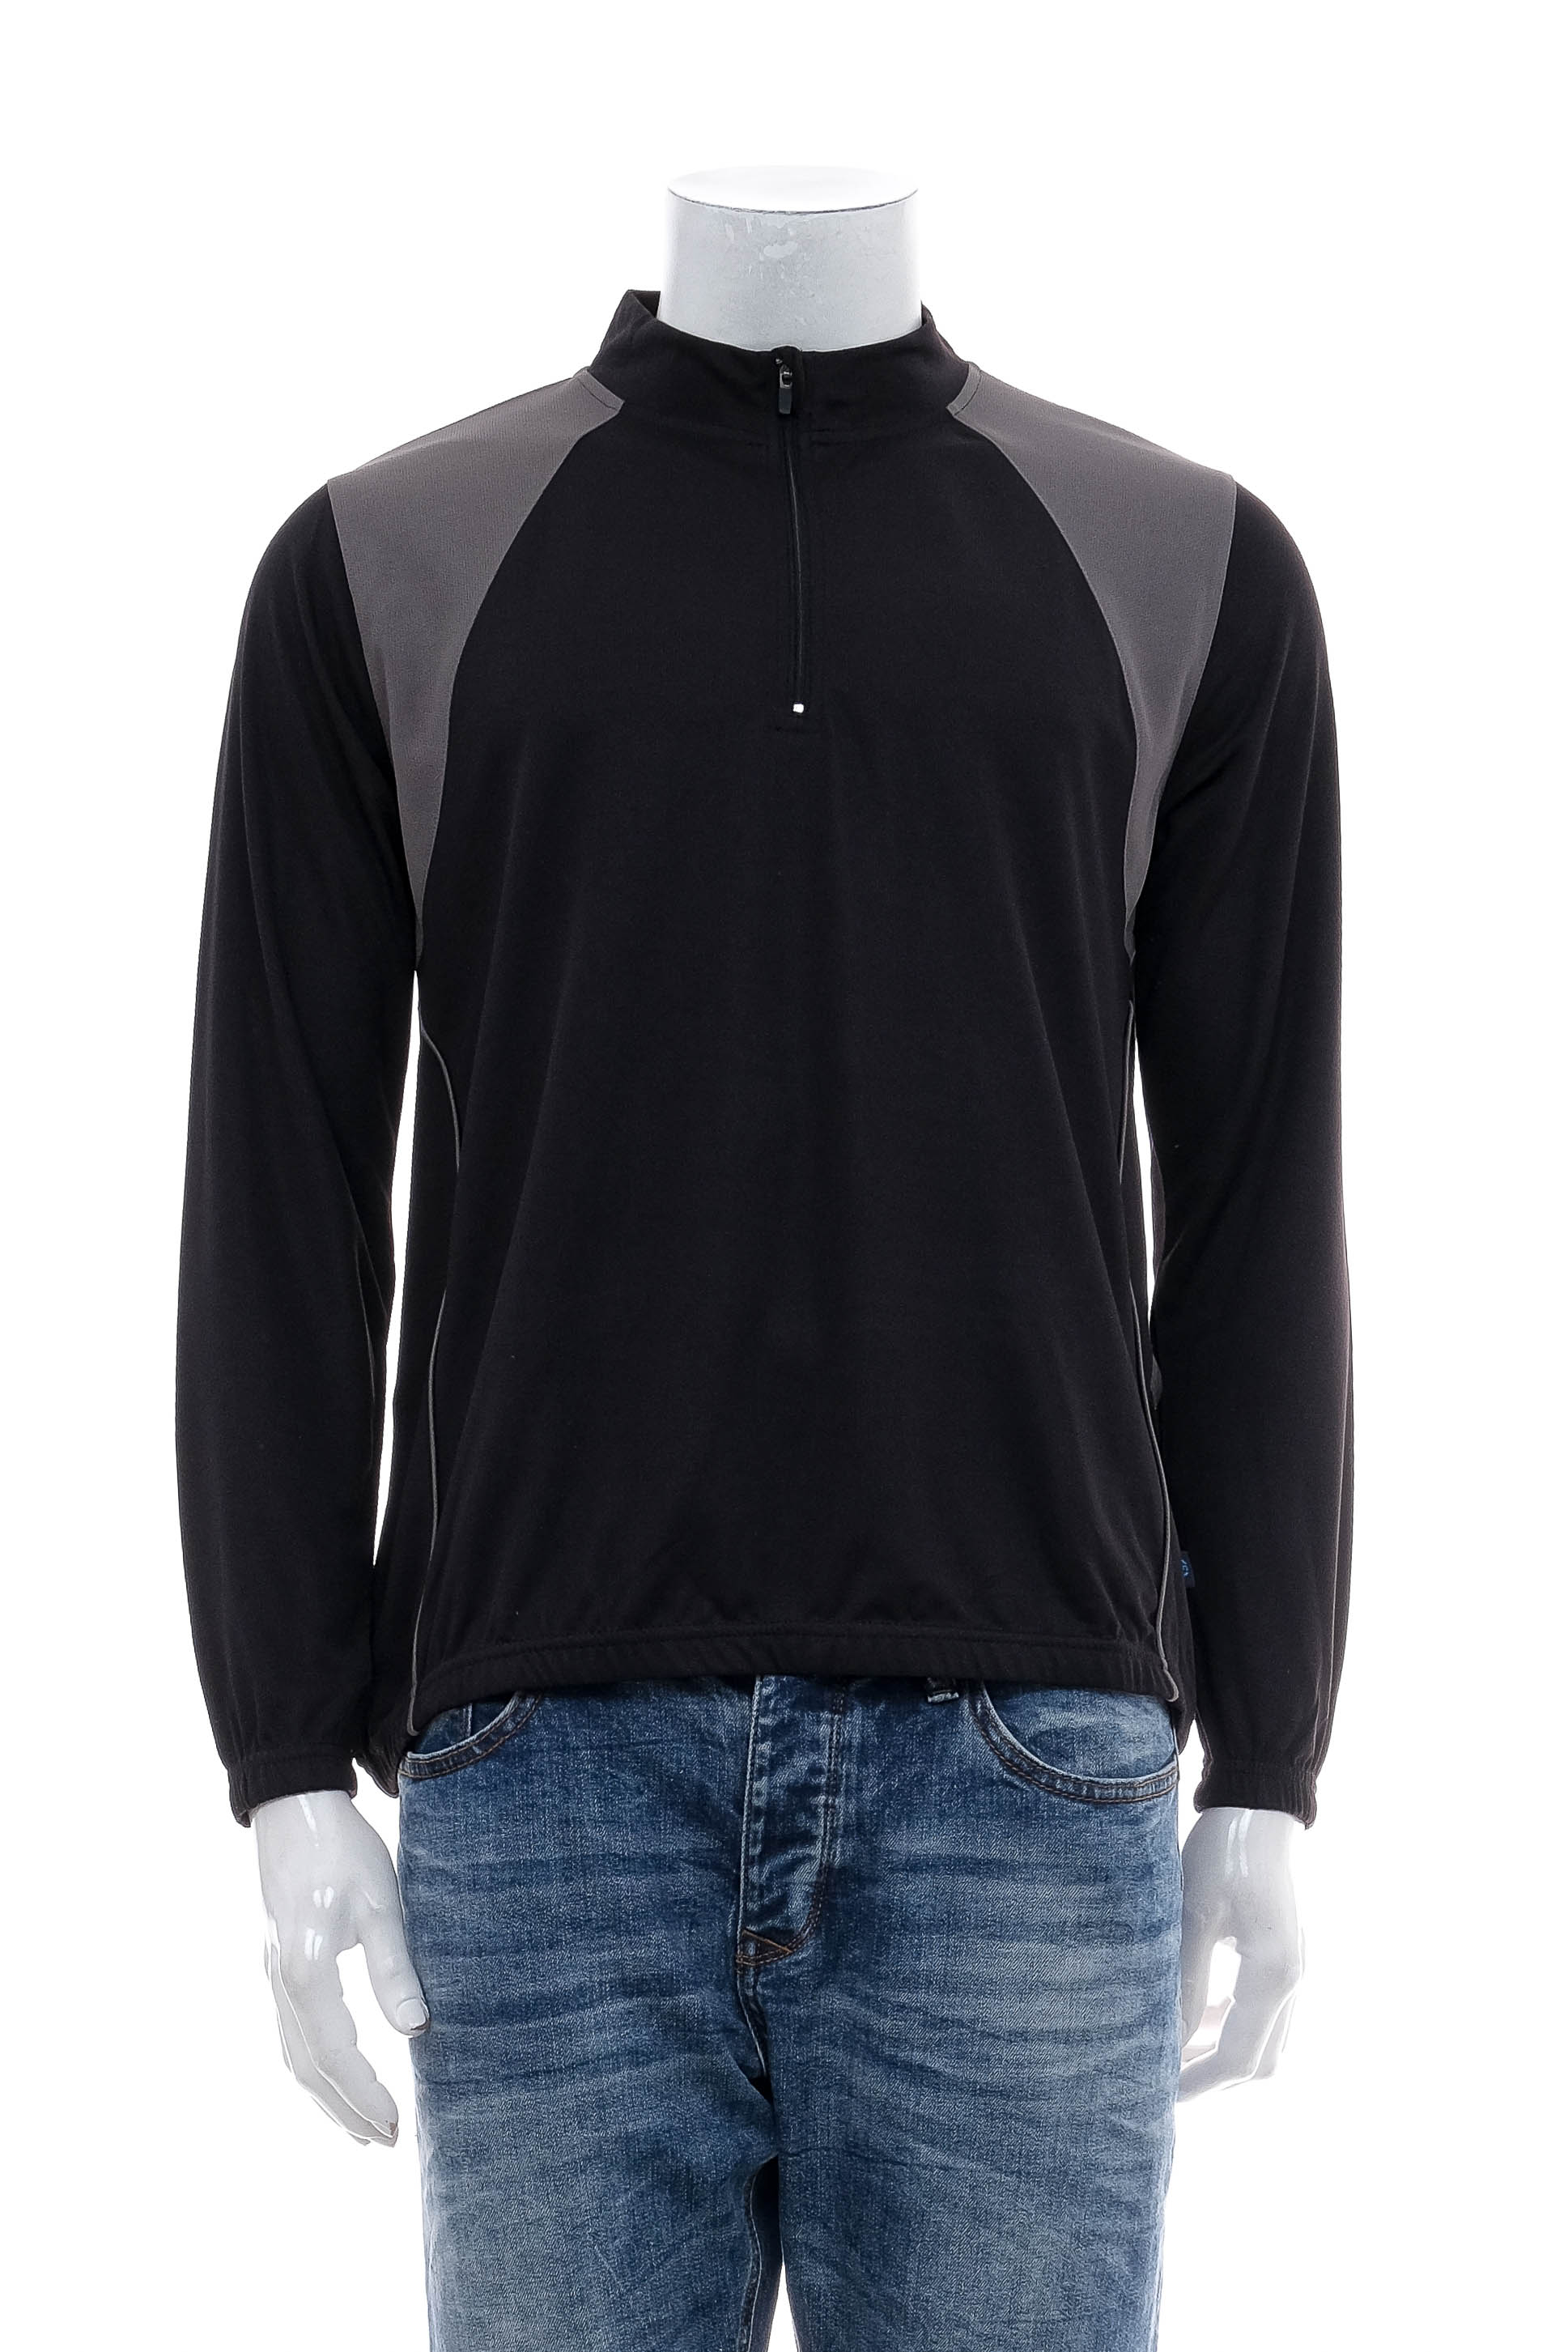 Men's blouse for cycling - C movement - 0